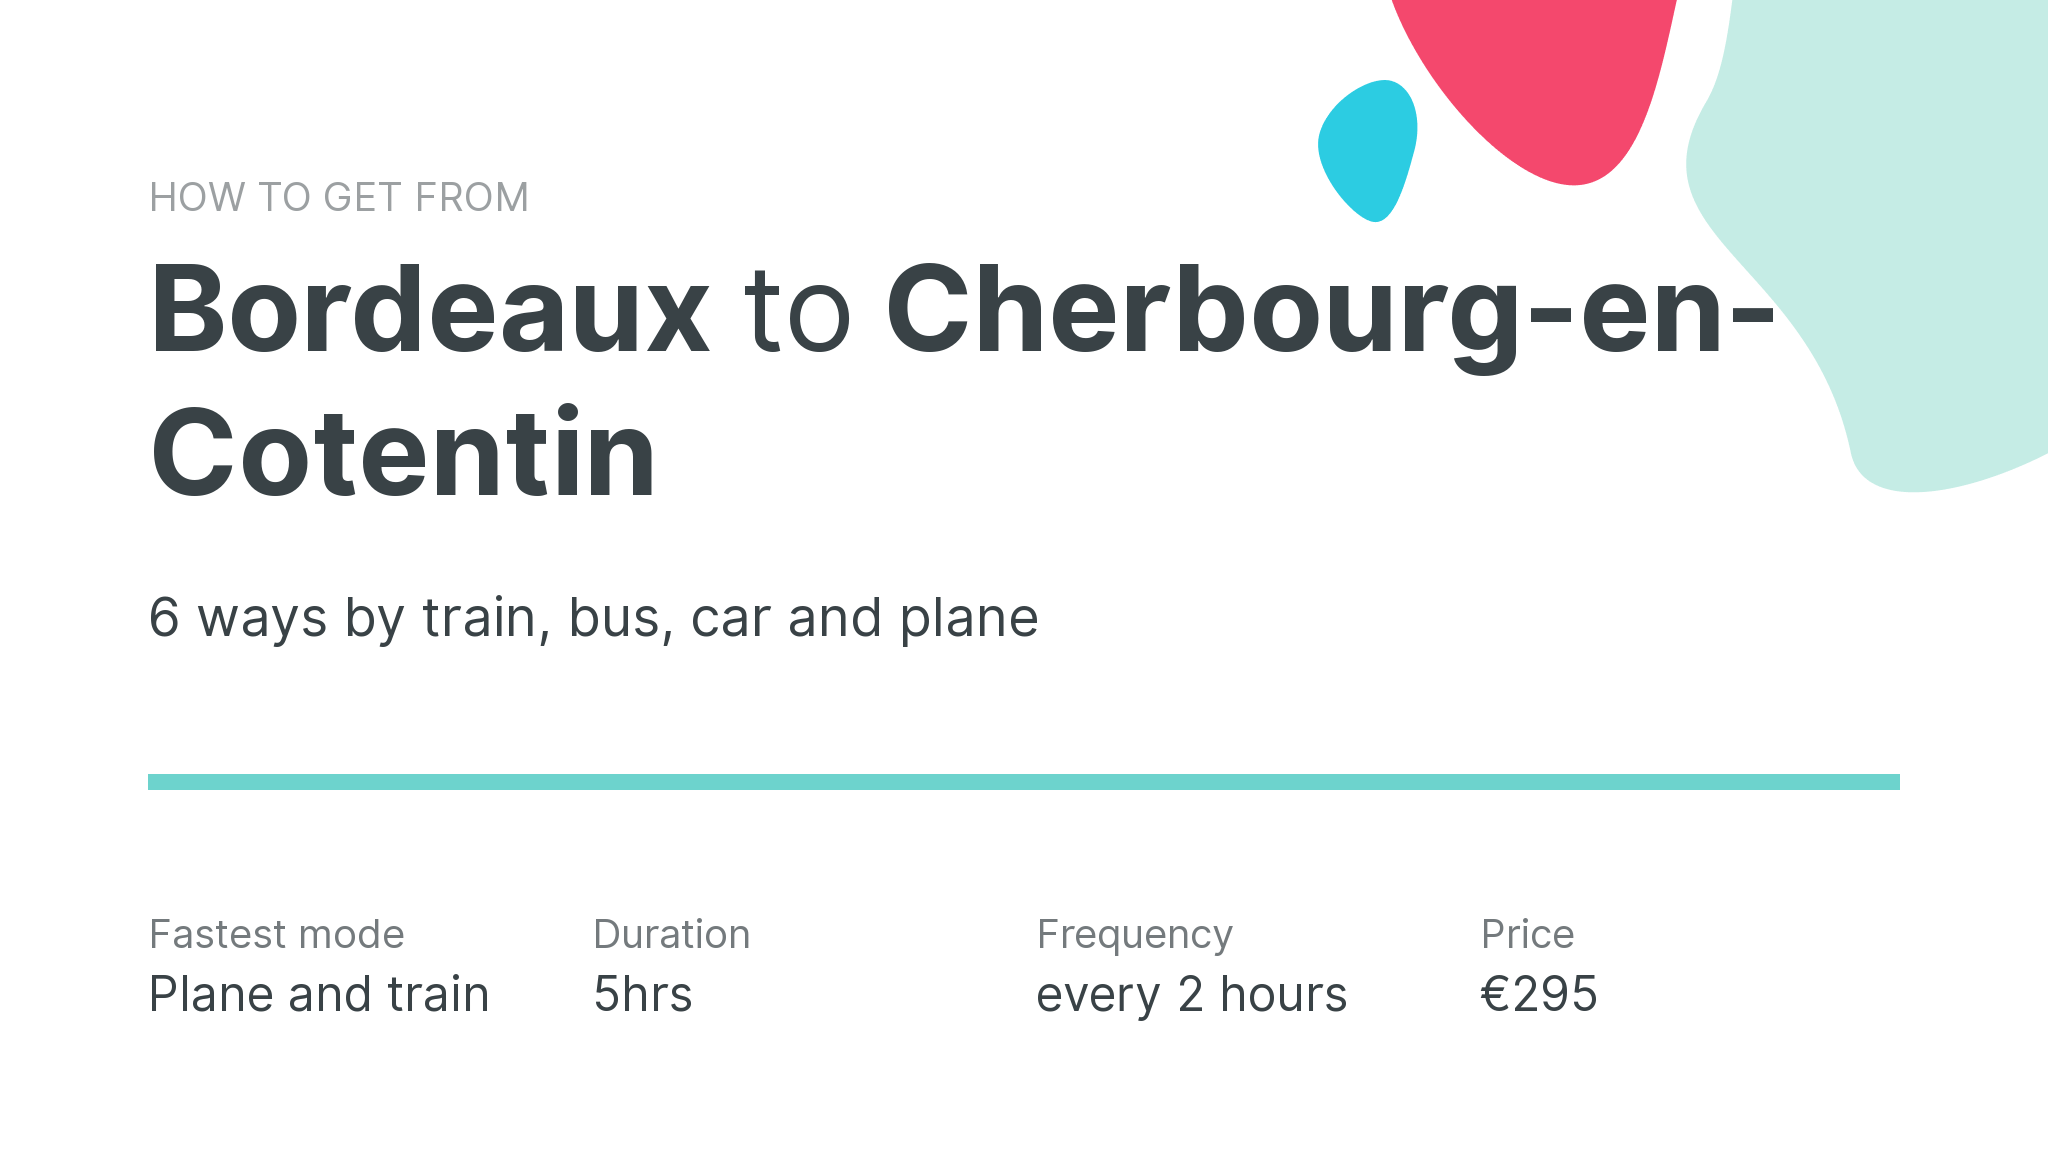 How do I get from Bordeaux to Cherbourg-en-Cotentin